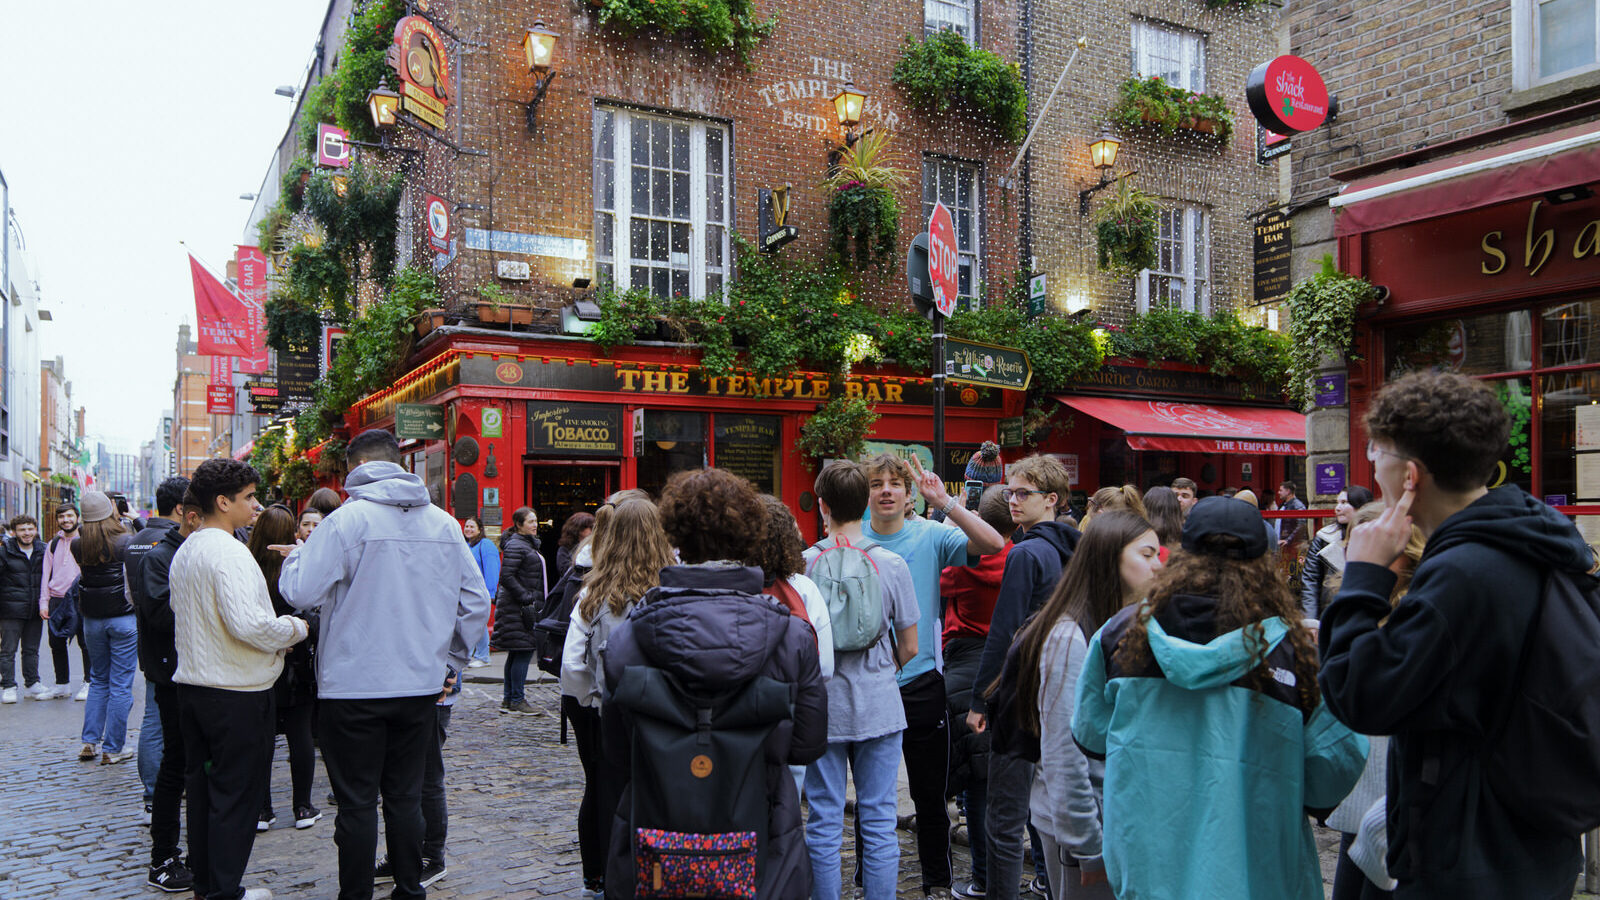 THE TEMPLE BAR PUB [IS IN TEMPLE BAR AND IT IS NOT THE OLDEST PUB IN THE IMMEDIATE AREA]-228209-1